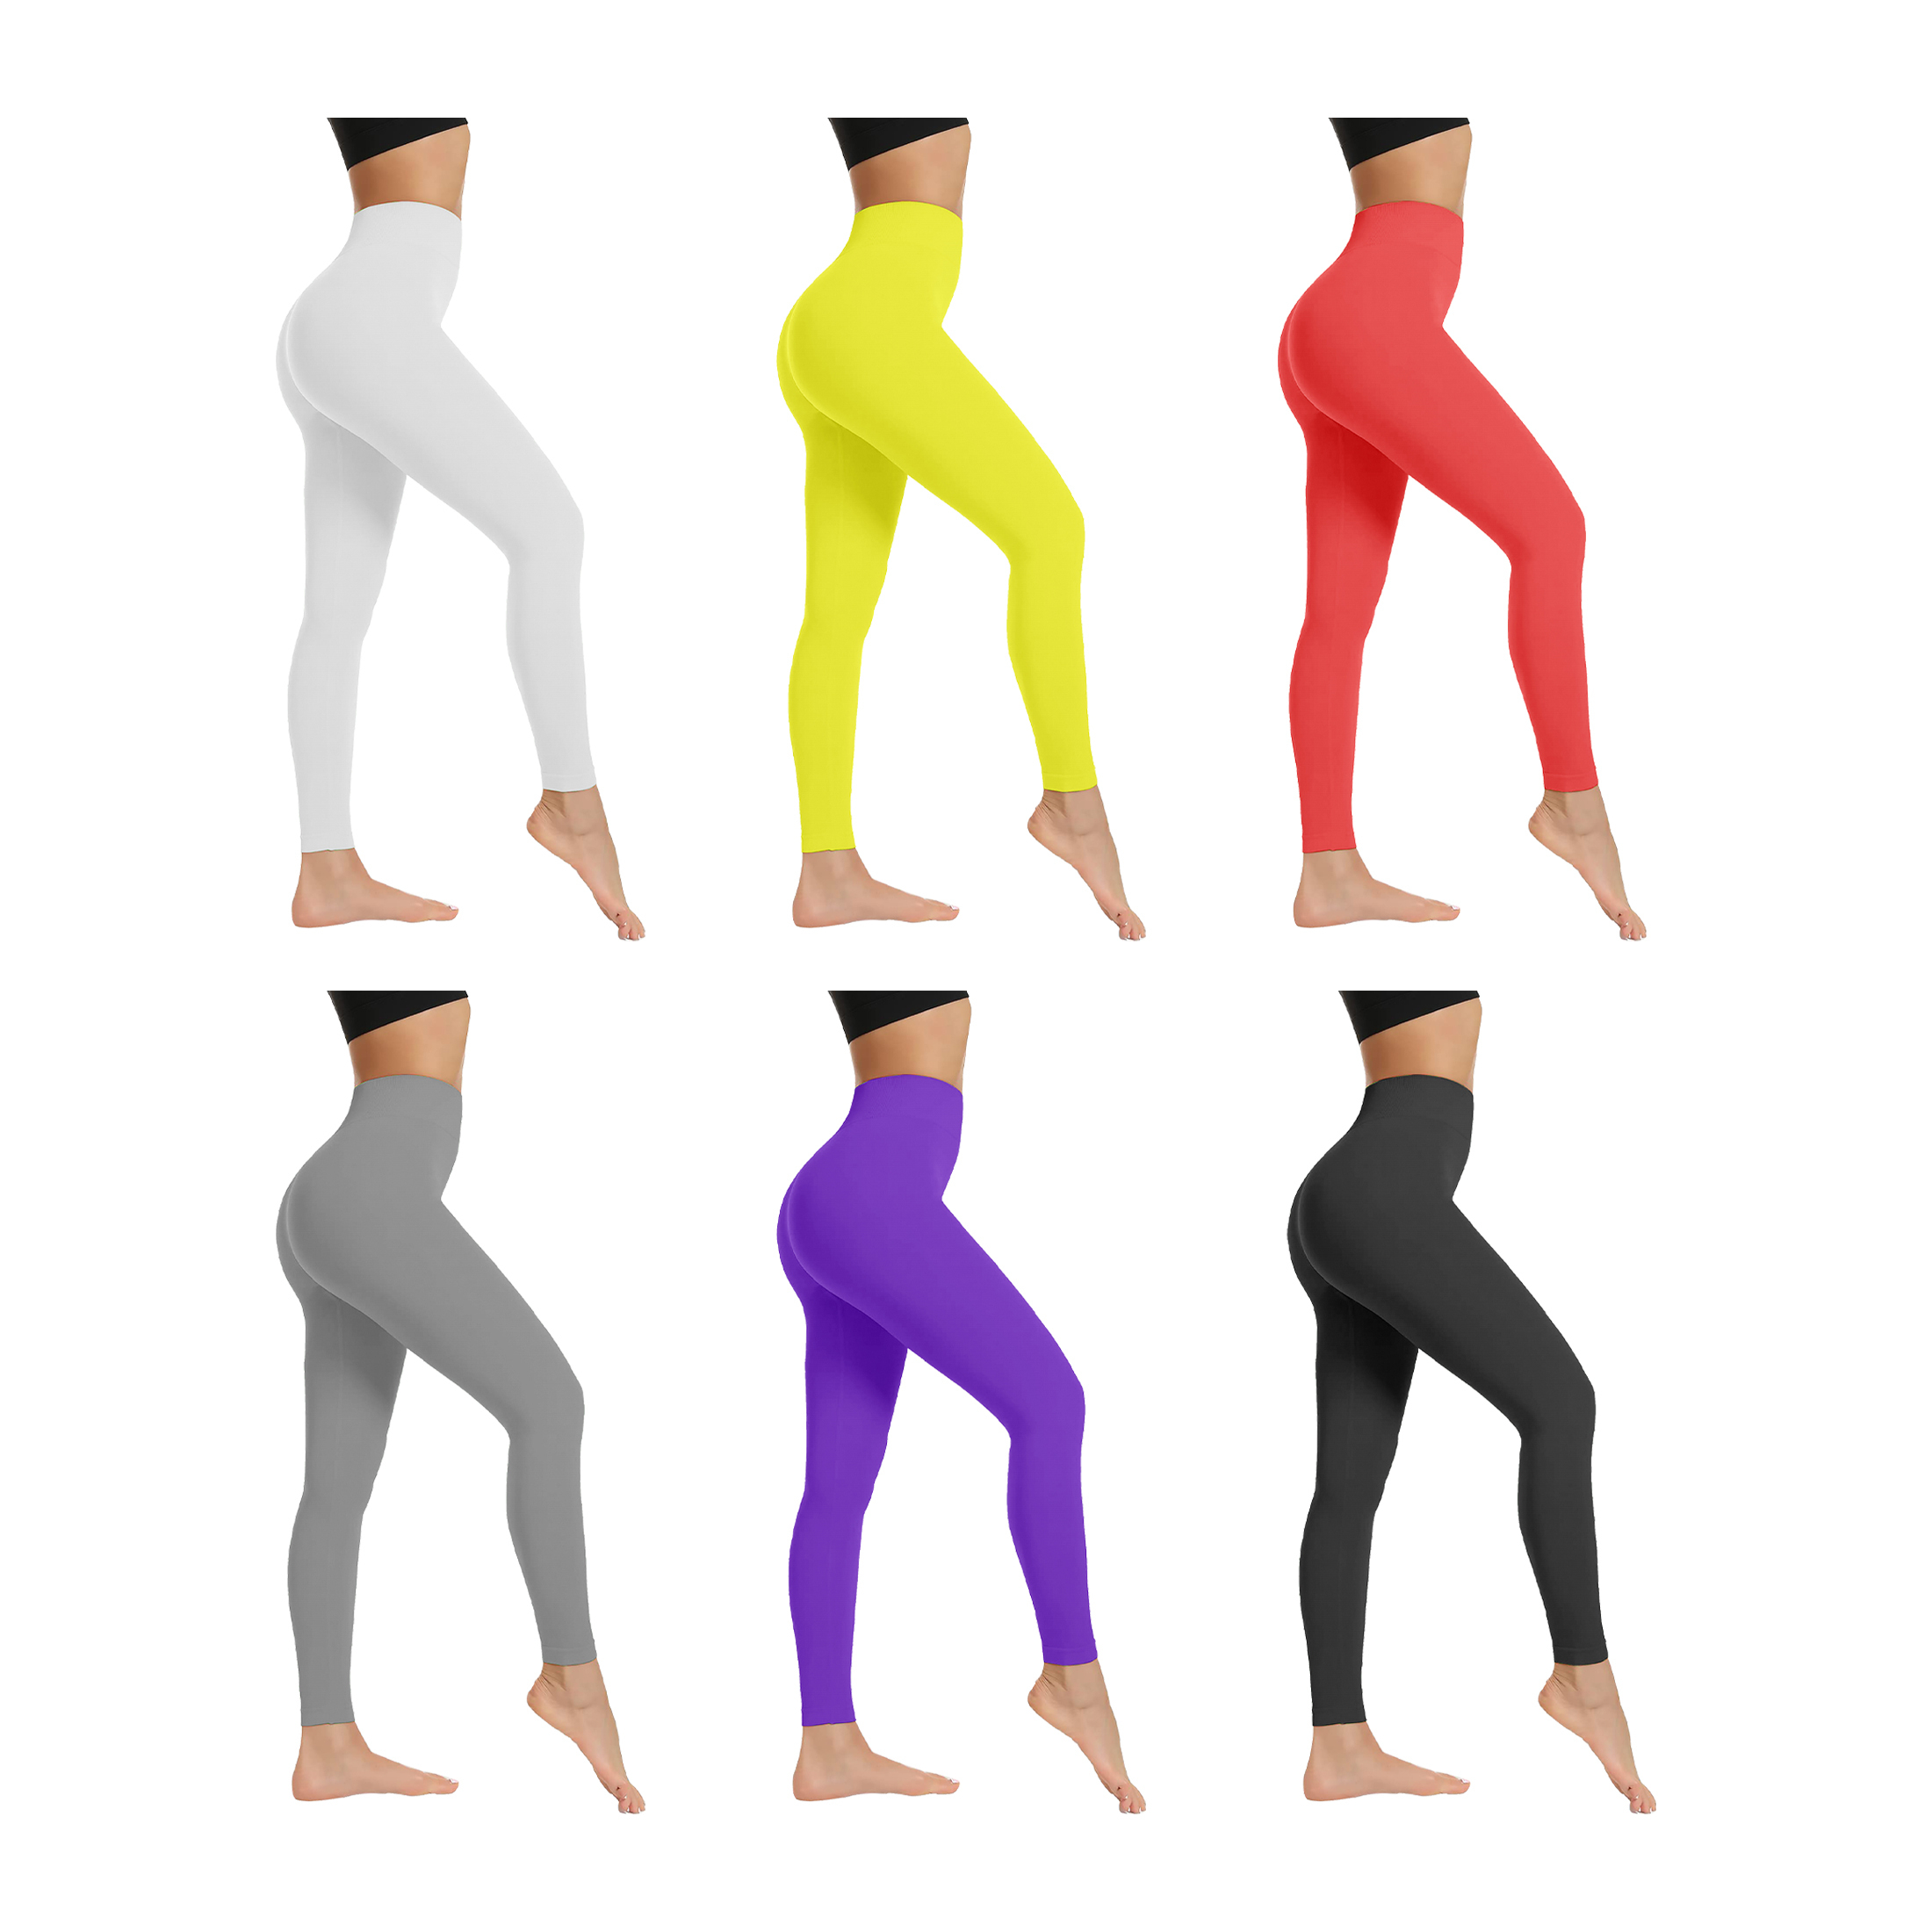 2-Pack: Women's High-Waist Ultra-Soft Stretchy Solid Fitness Yoga Leggings Pants - XS